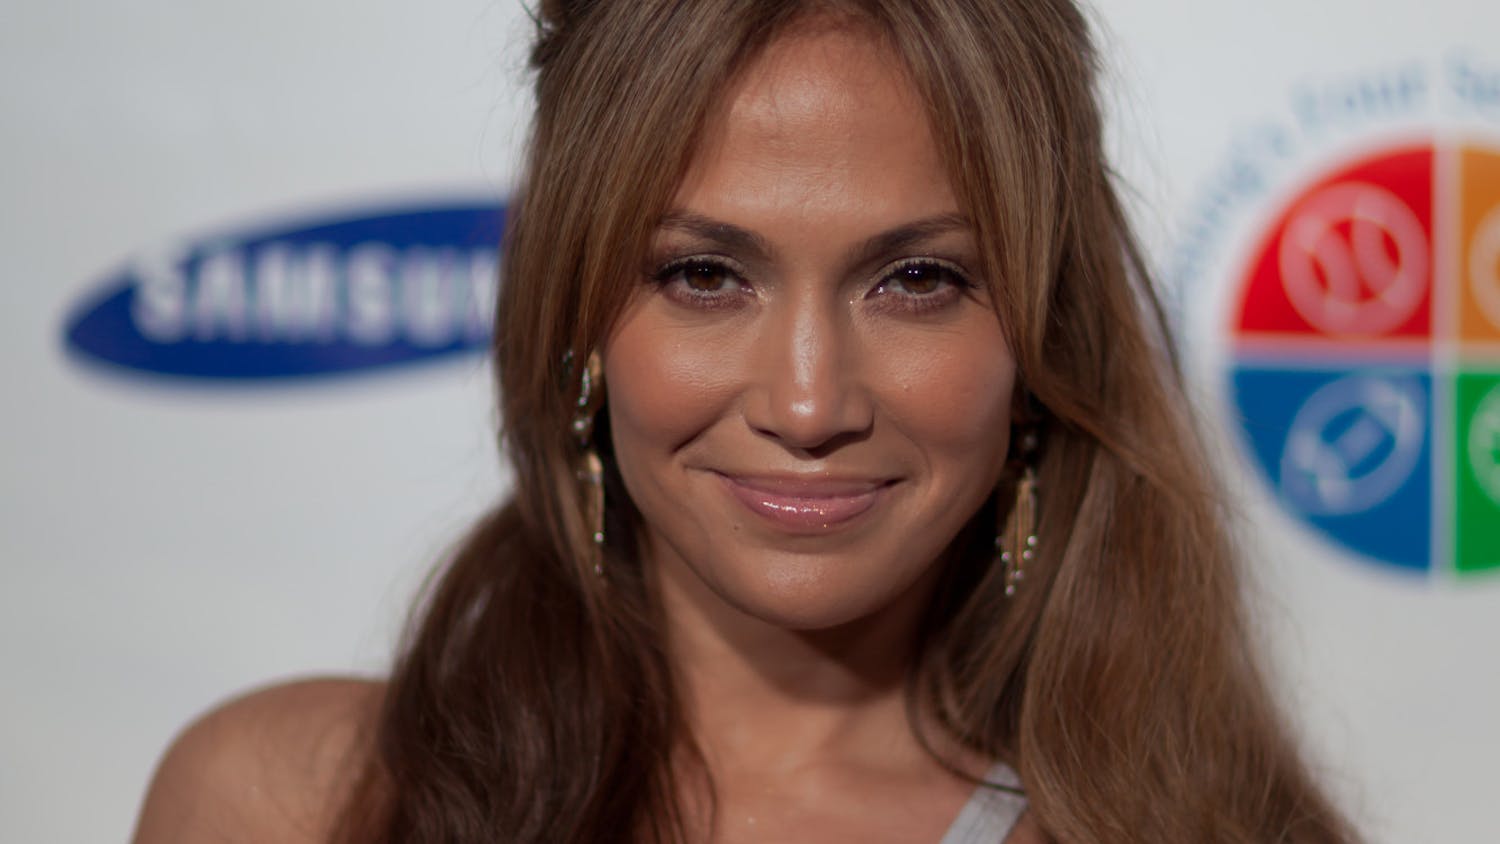 Jennifer Lopez has an extensive entertainment career, having released nine studio albums and being featured in over 30 films. (Photo Courtesy of Flickr / “Jennifer Lopez” by Jens Schott Knudsen / July 17, 2010)